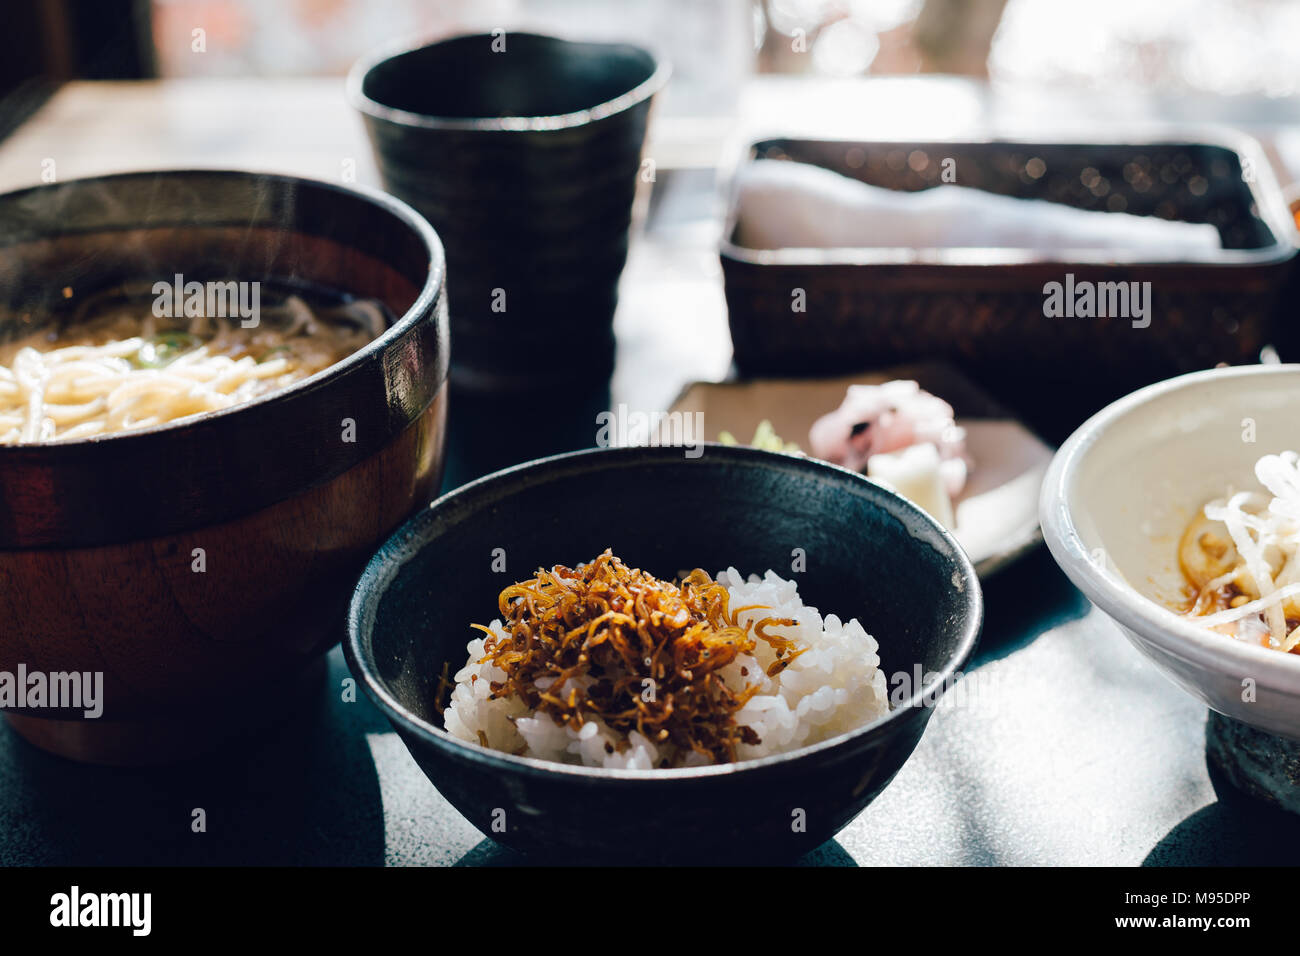 Japanese food, rice and noodle Soba in Japanese restaurant Stock Photo